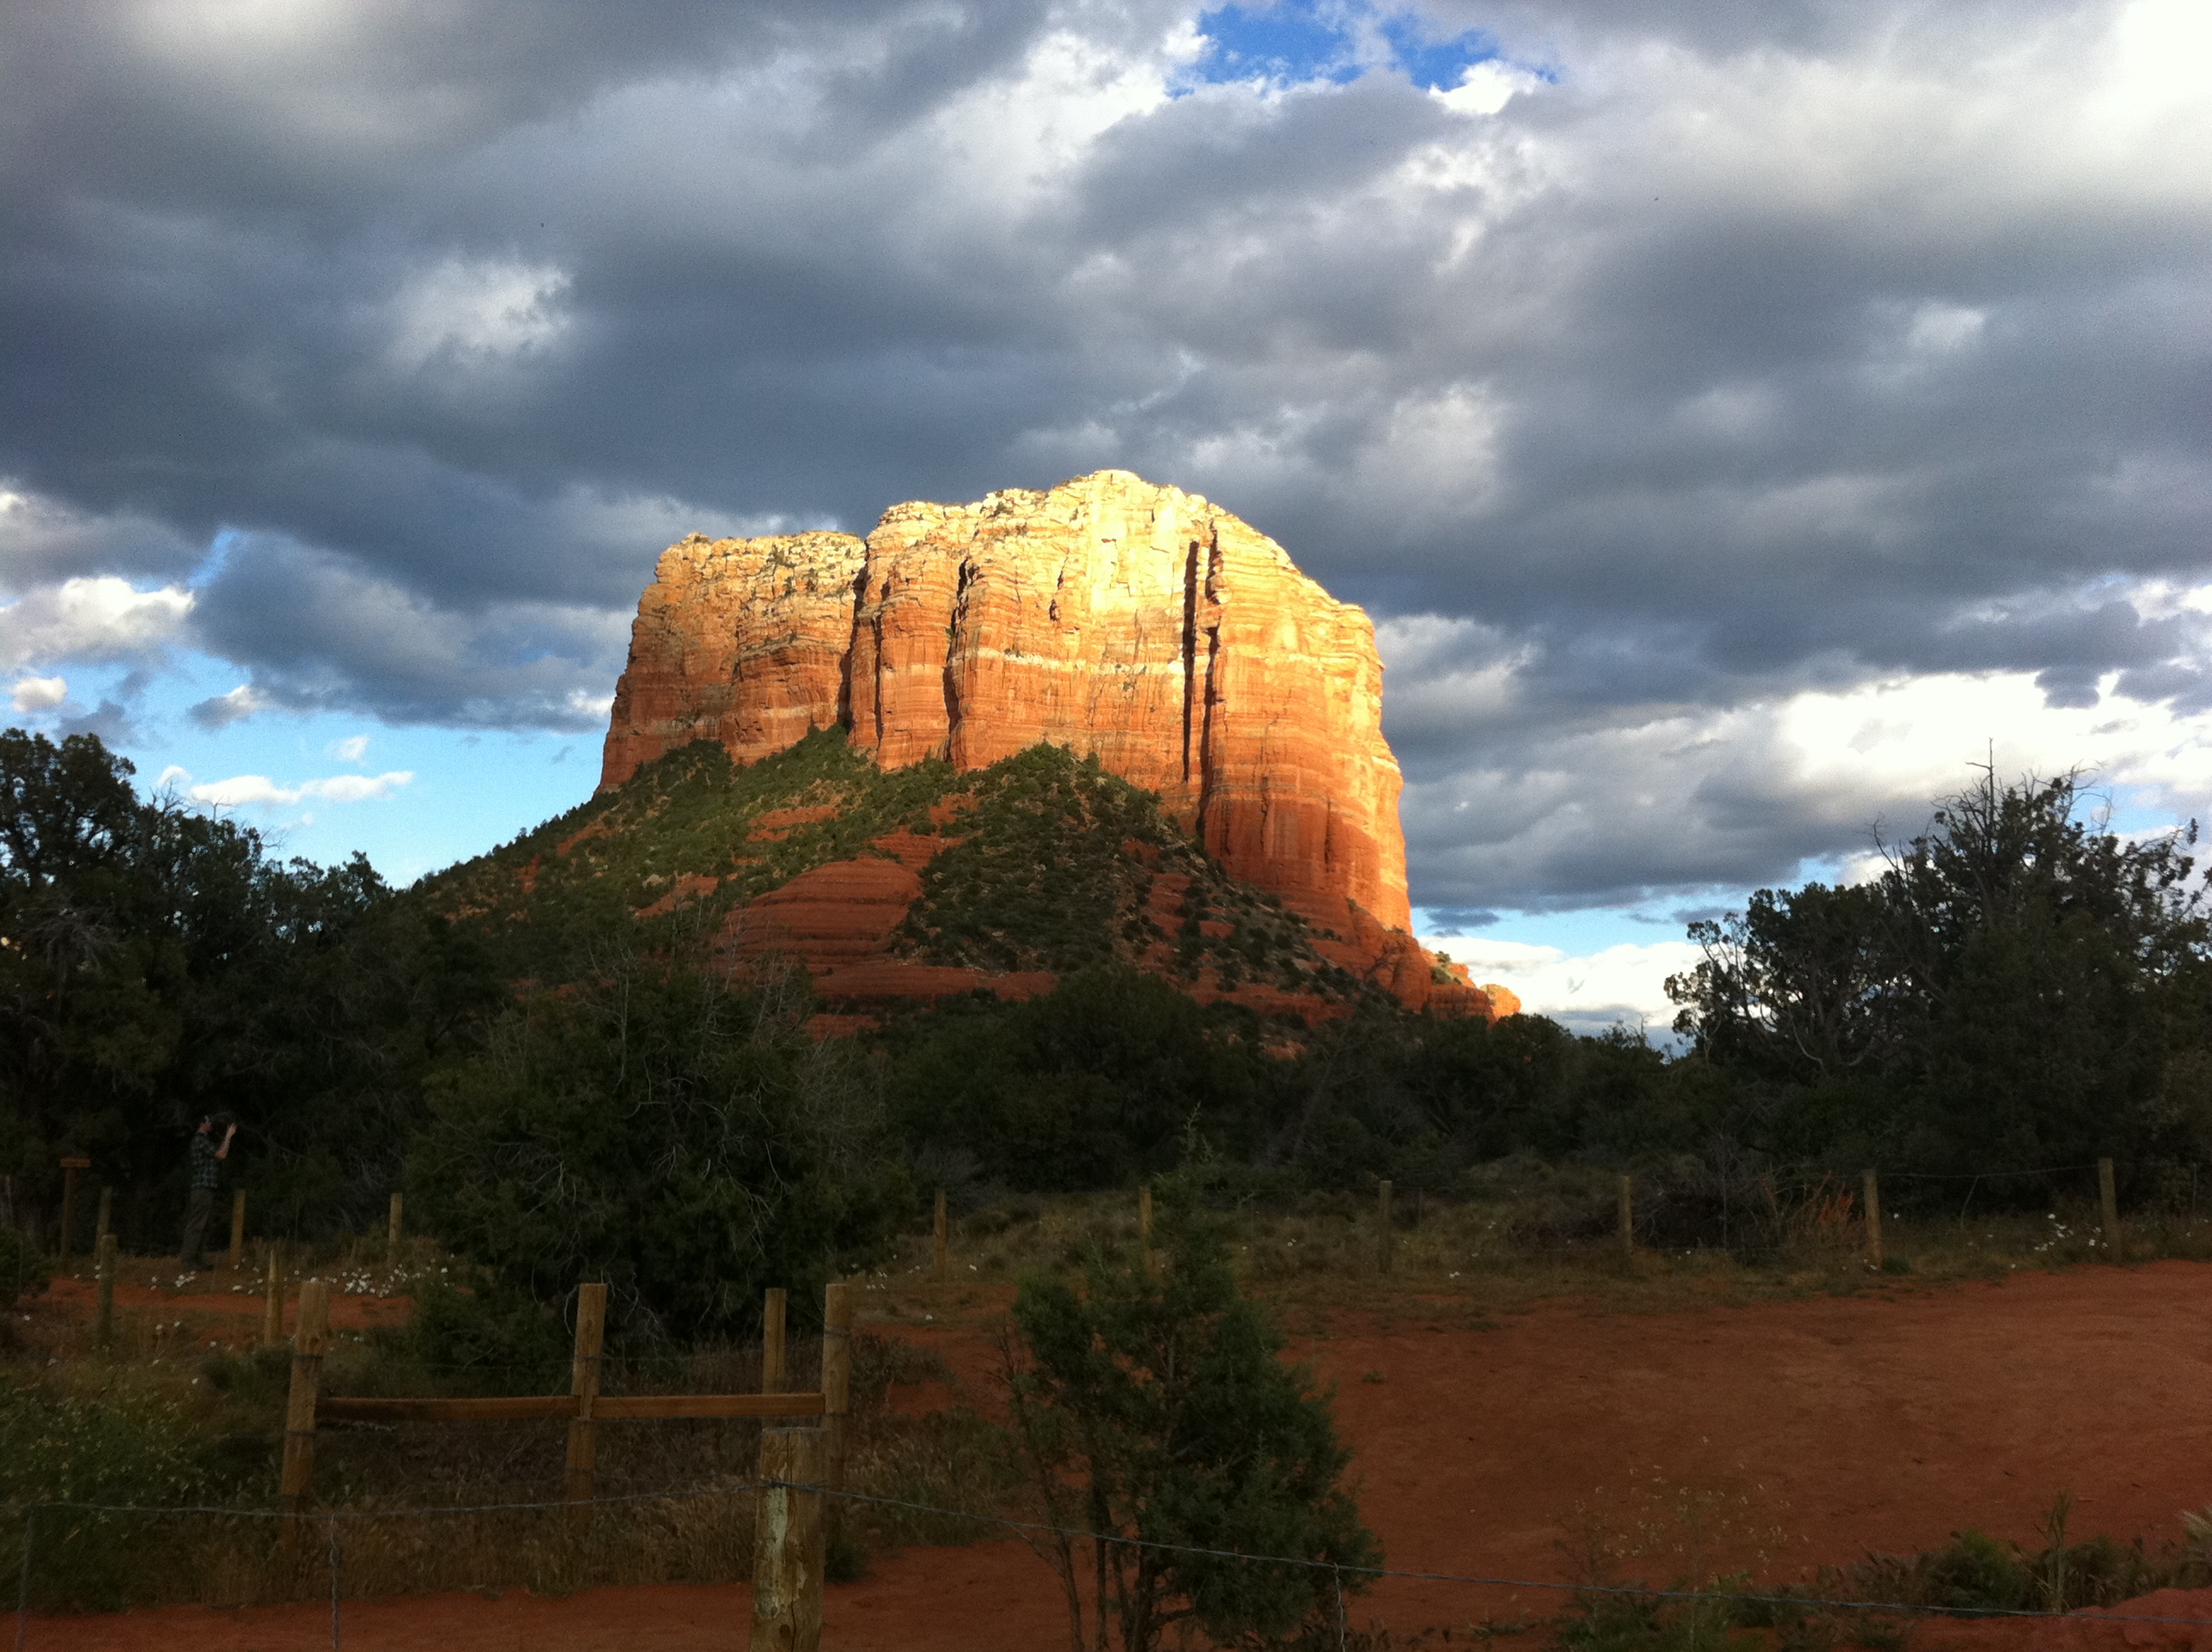 Sedona's Red Rocks are a perfect backdrop for a journey of self-discovery, but not while deprived of food or water.